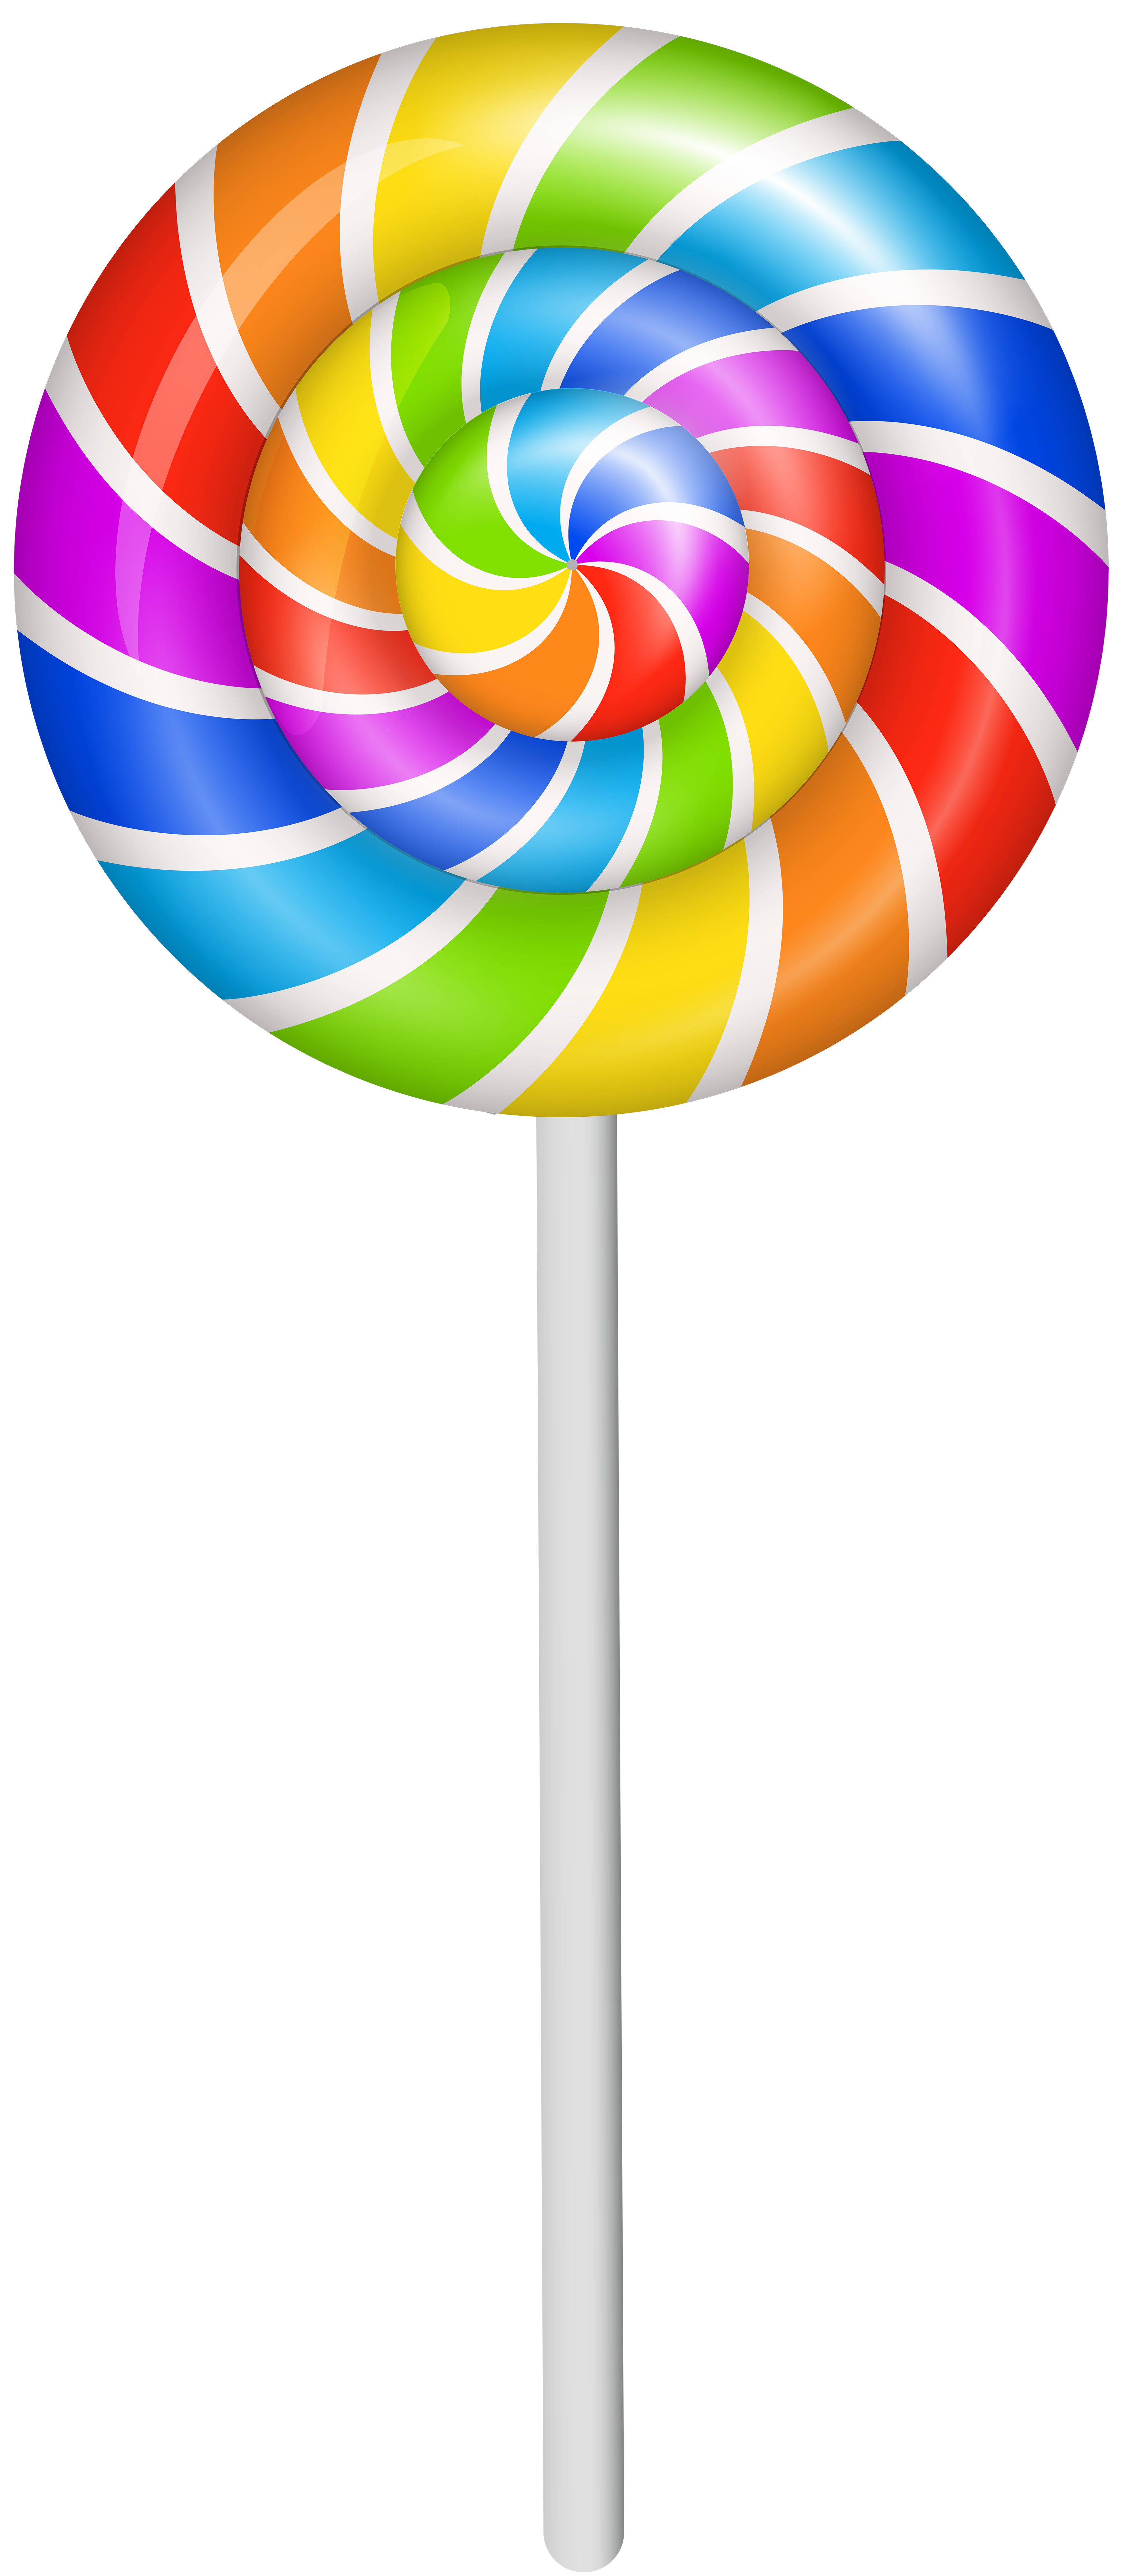 Colorful Lollipop Png Clip Art Image Gallery Yopriceville Images, Photos, Reviews